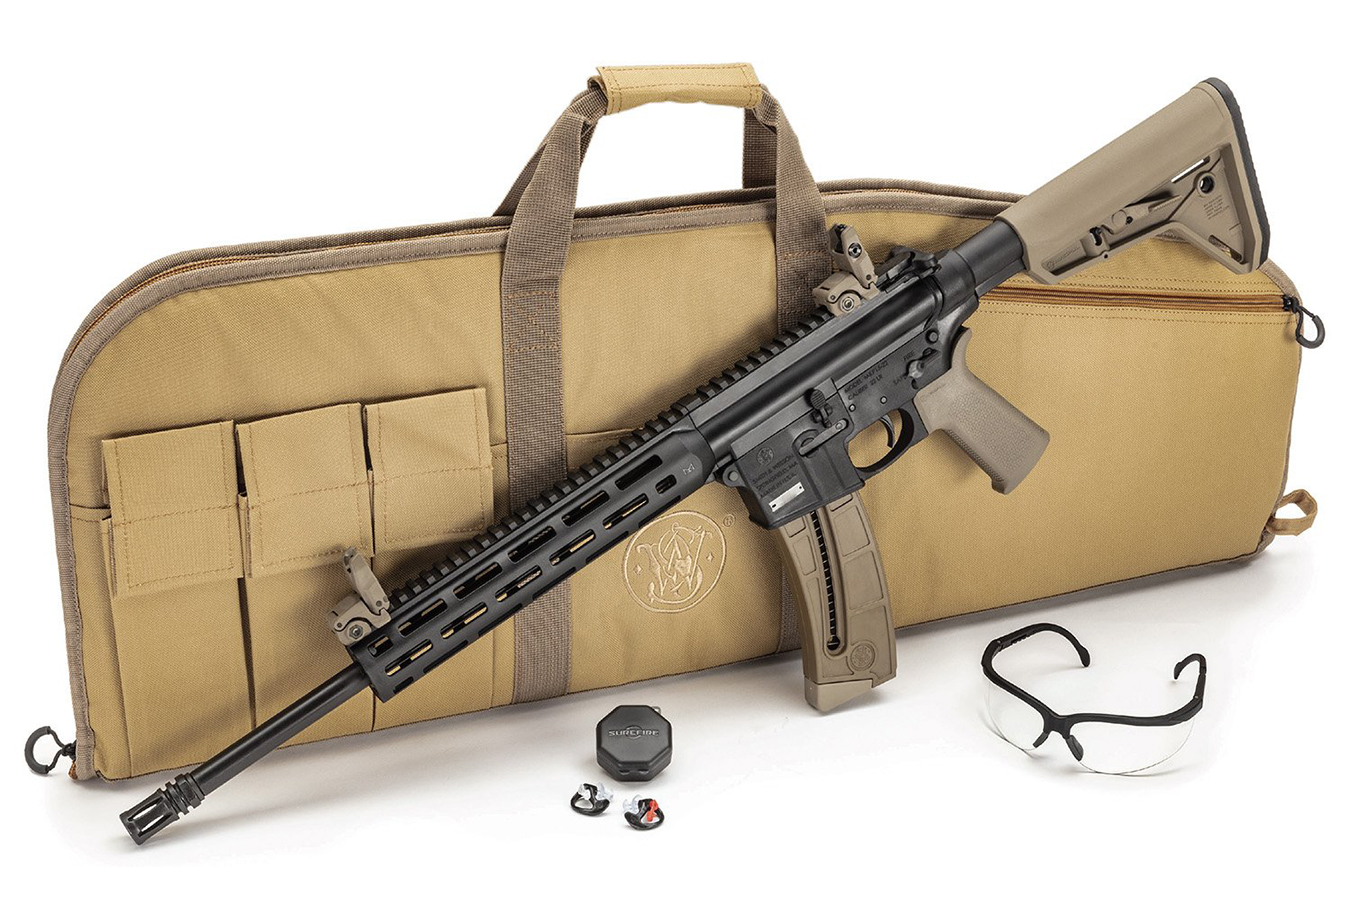 No. 3 Best Selling: SMITH AND WESSON MP15-22 SPORT 22LR SEMI-AUTO RIFLE WITH 16.5 INCH BARREL, FDE MAGPUL FURNITURE A